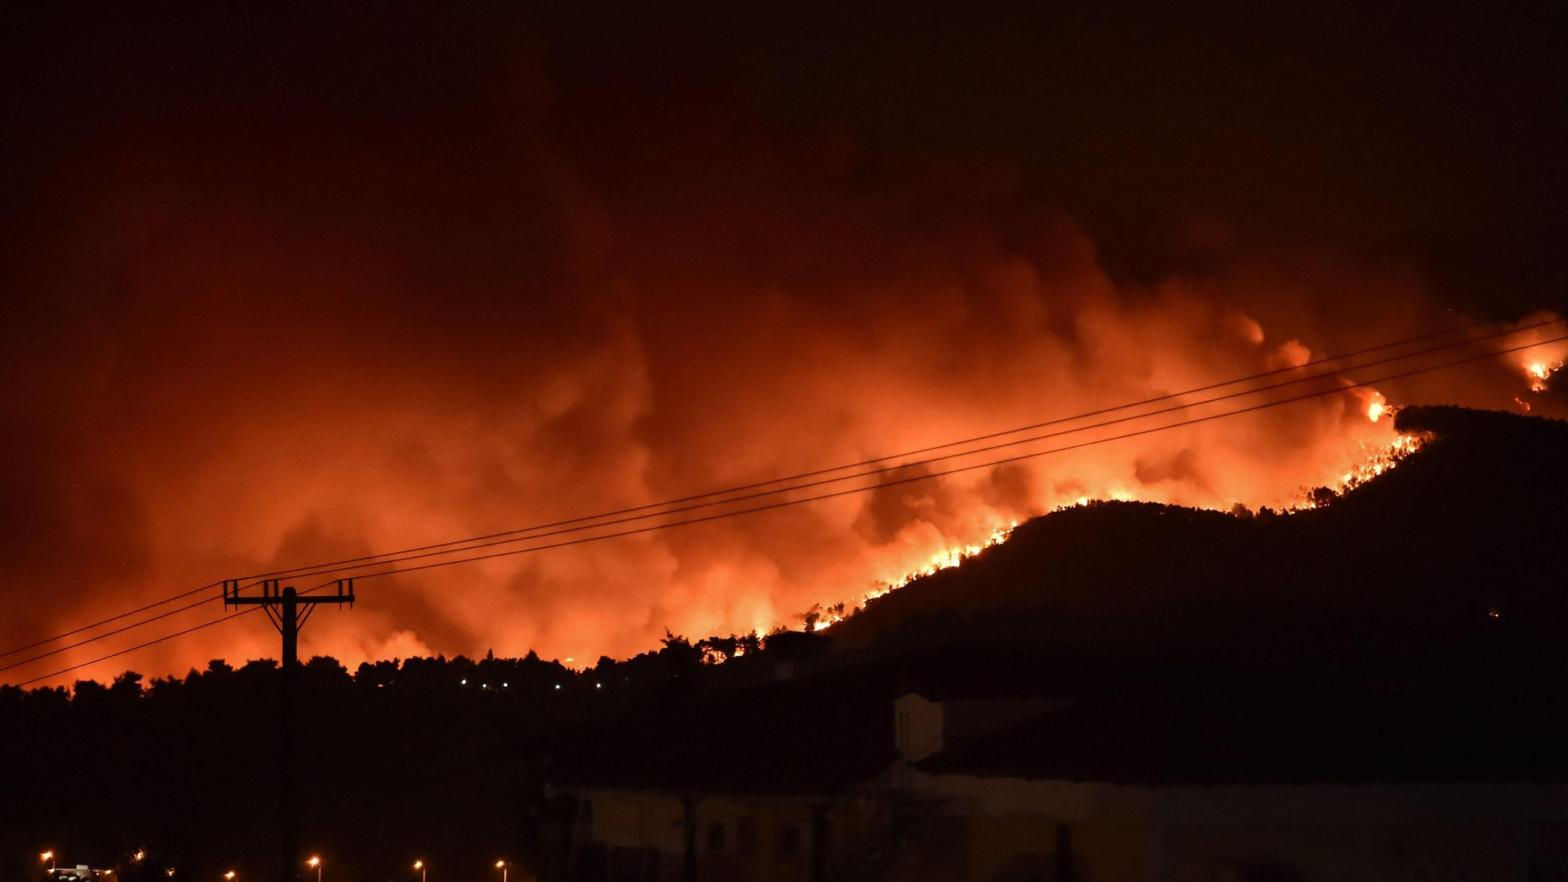 Flames rise from a fire spreading around Kapandriti, a town on the outskirts of Athens, Greece, on August 5, 2021. (Photo: Louisa Gouliamaki, Getty Images)